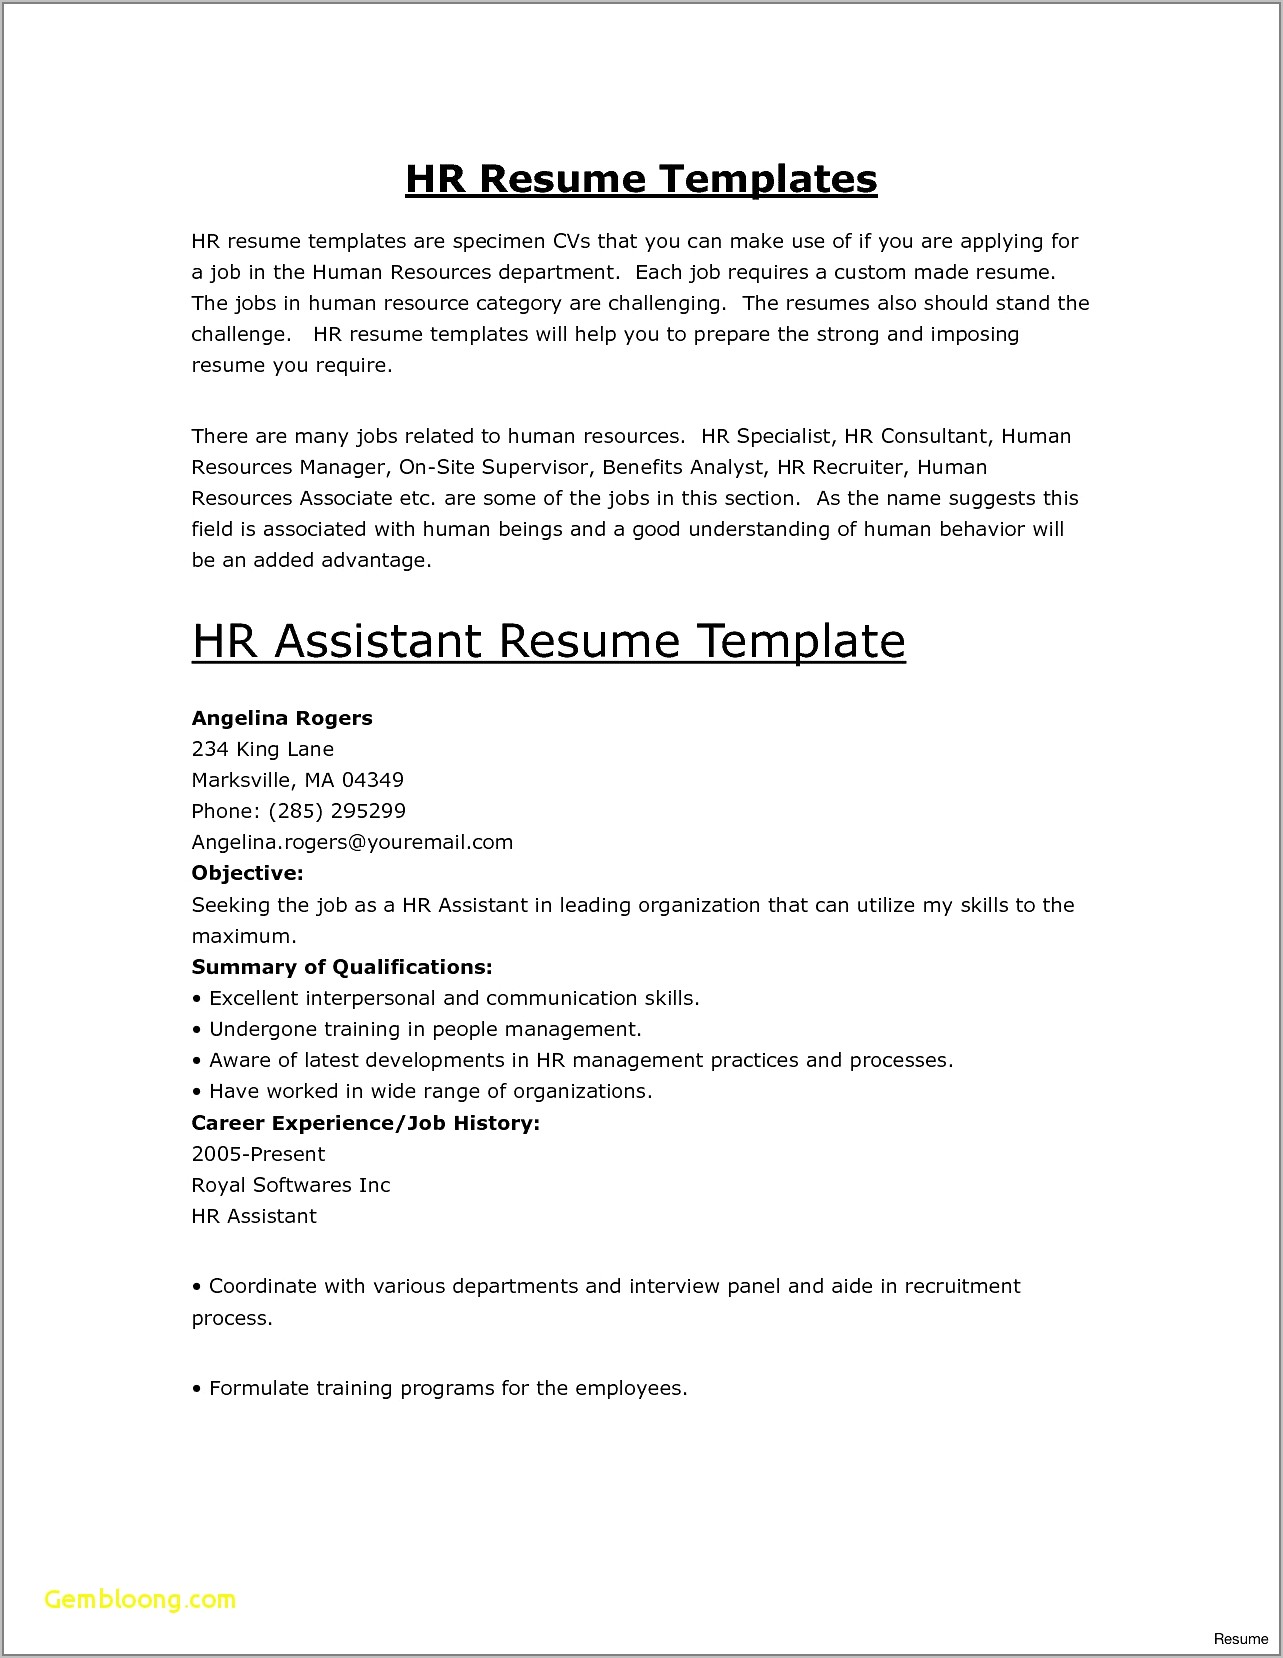 Resume Format For Job Interview Free Download